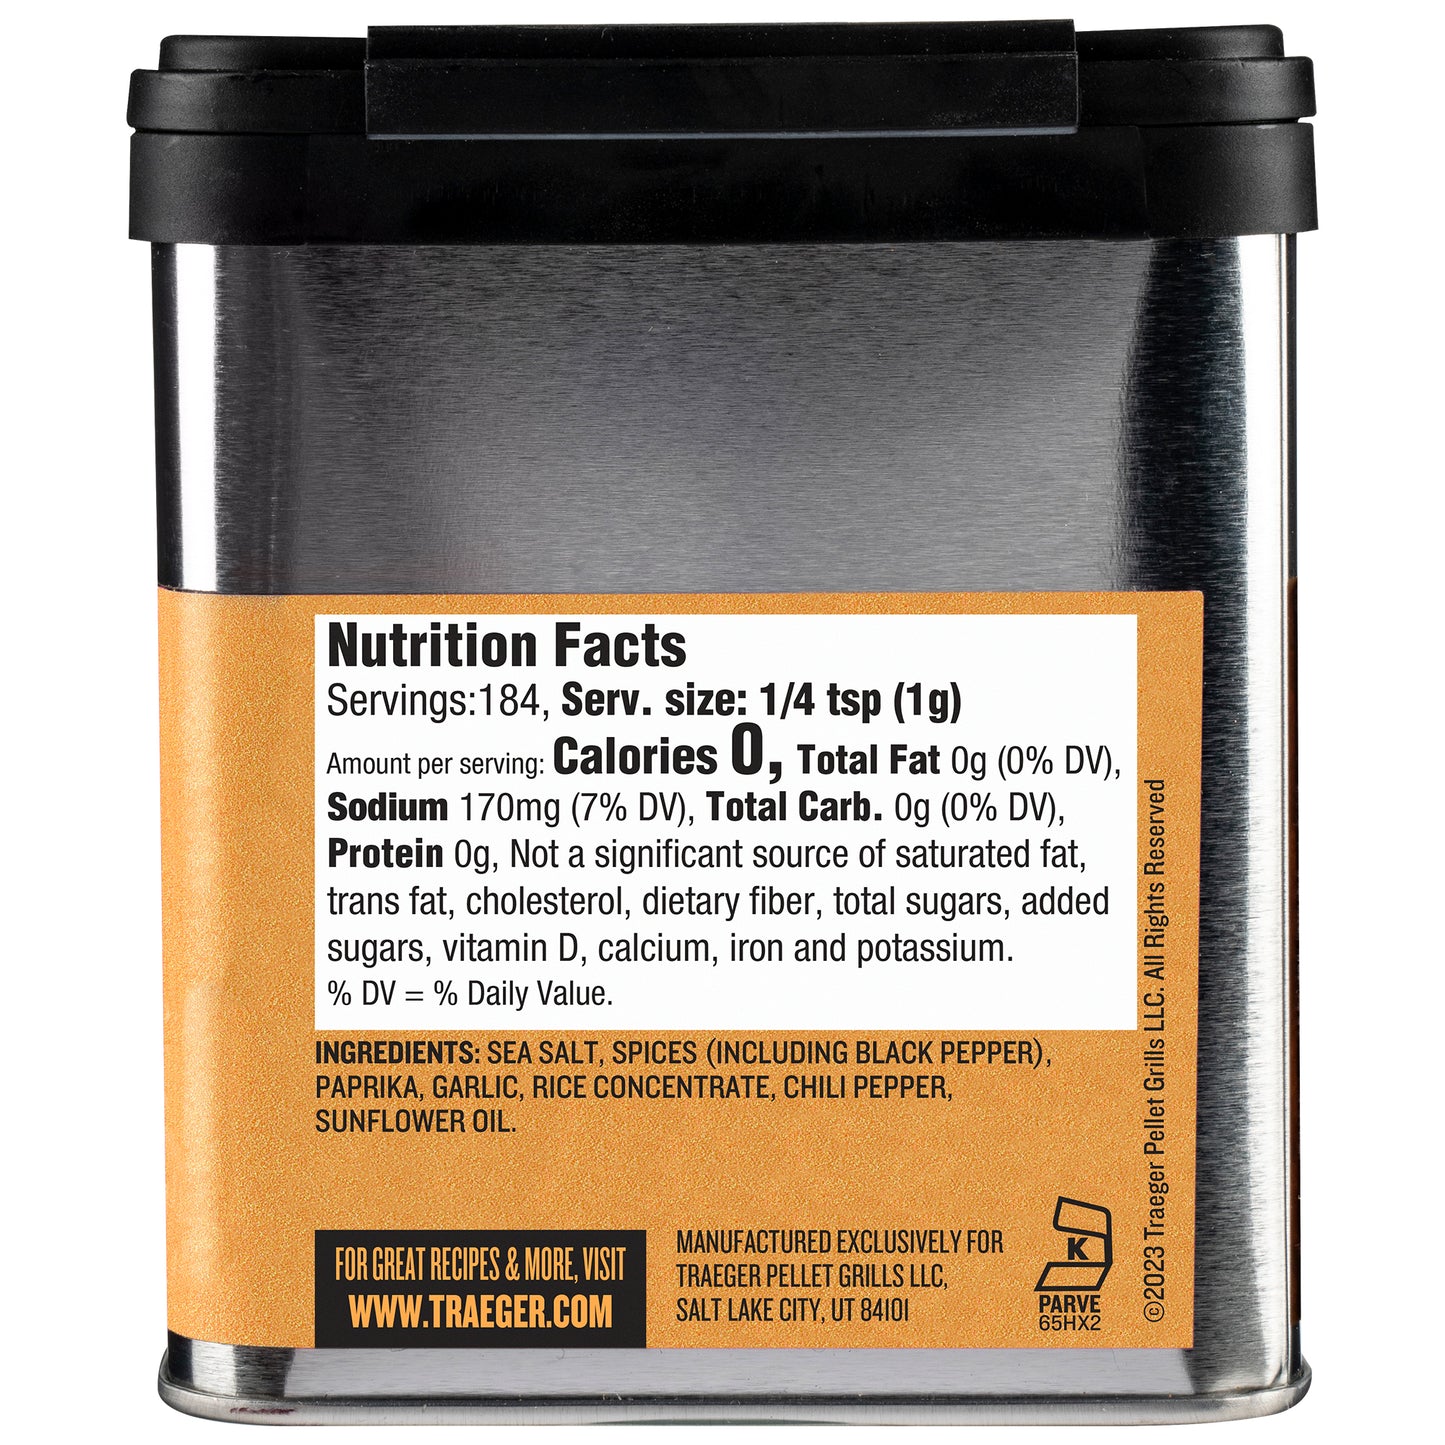 Traeger recommends this spicy fajita rub for high quality fajitas cooked on a Flatrock griddle.